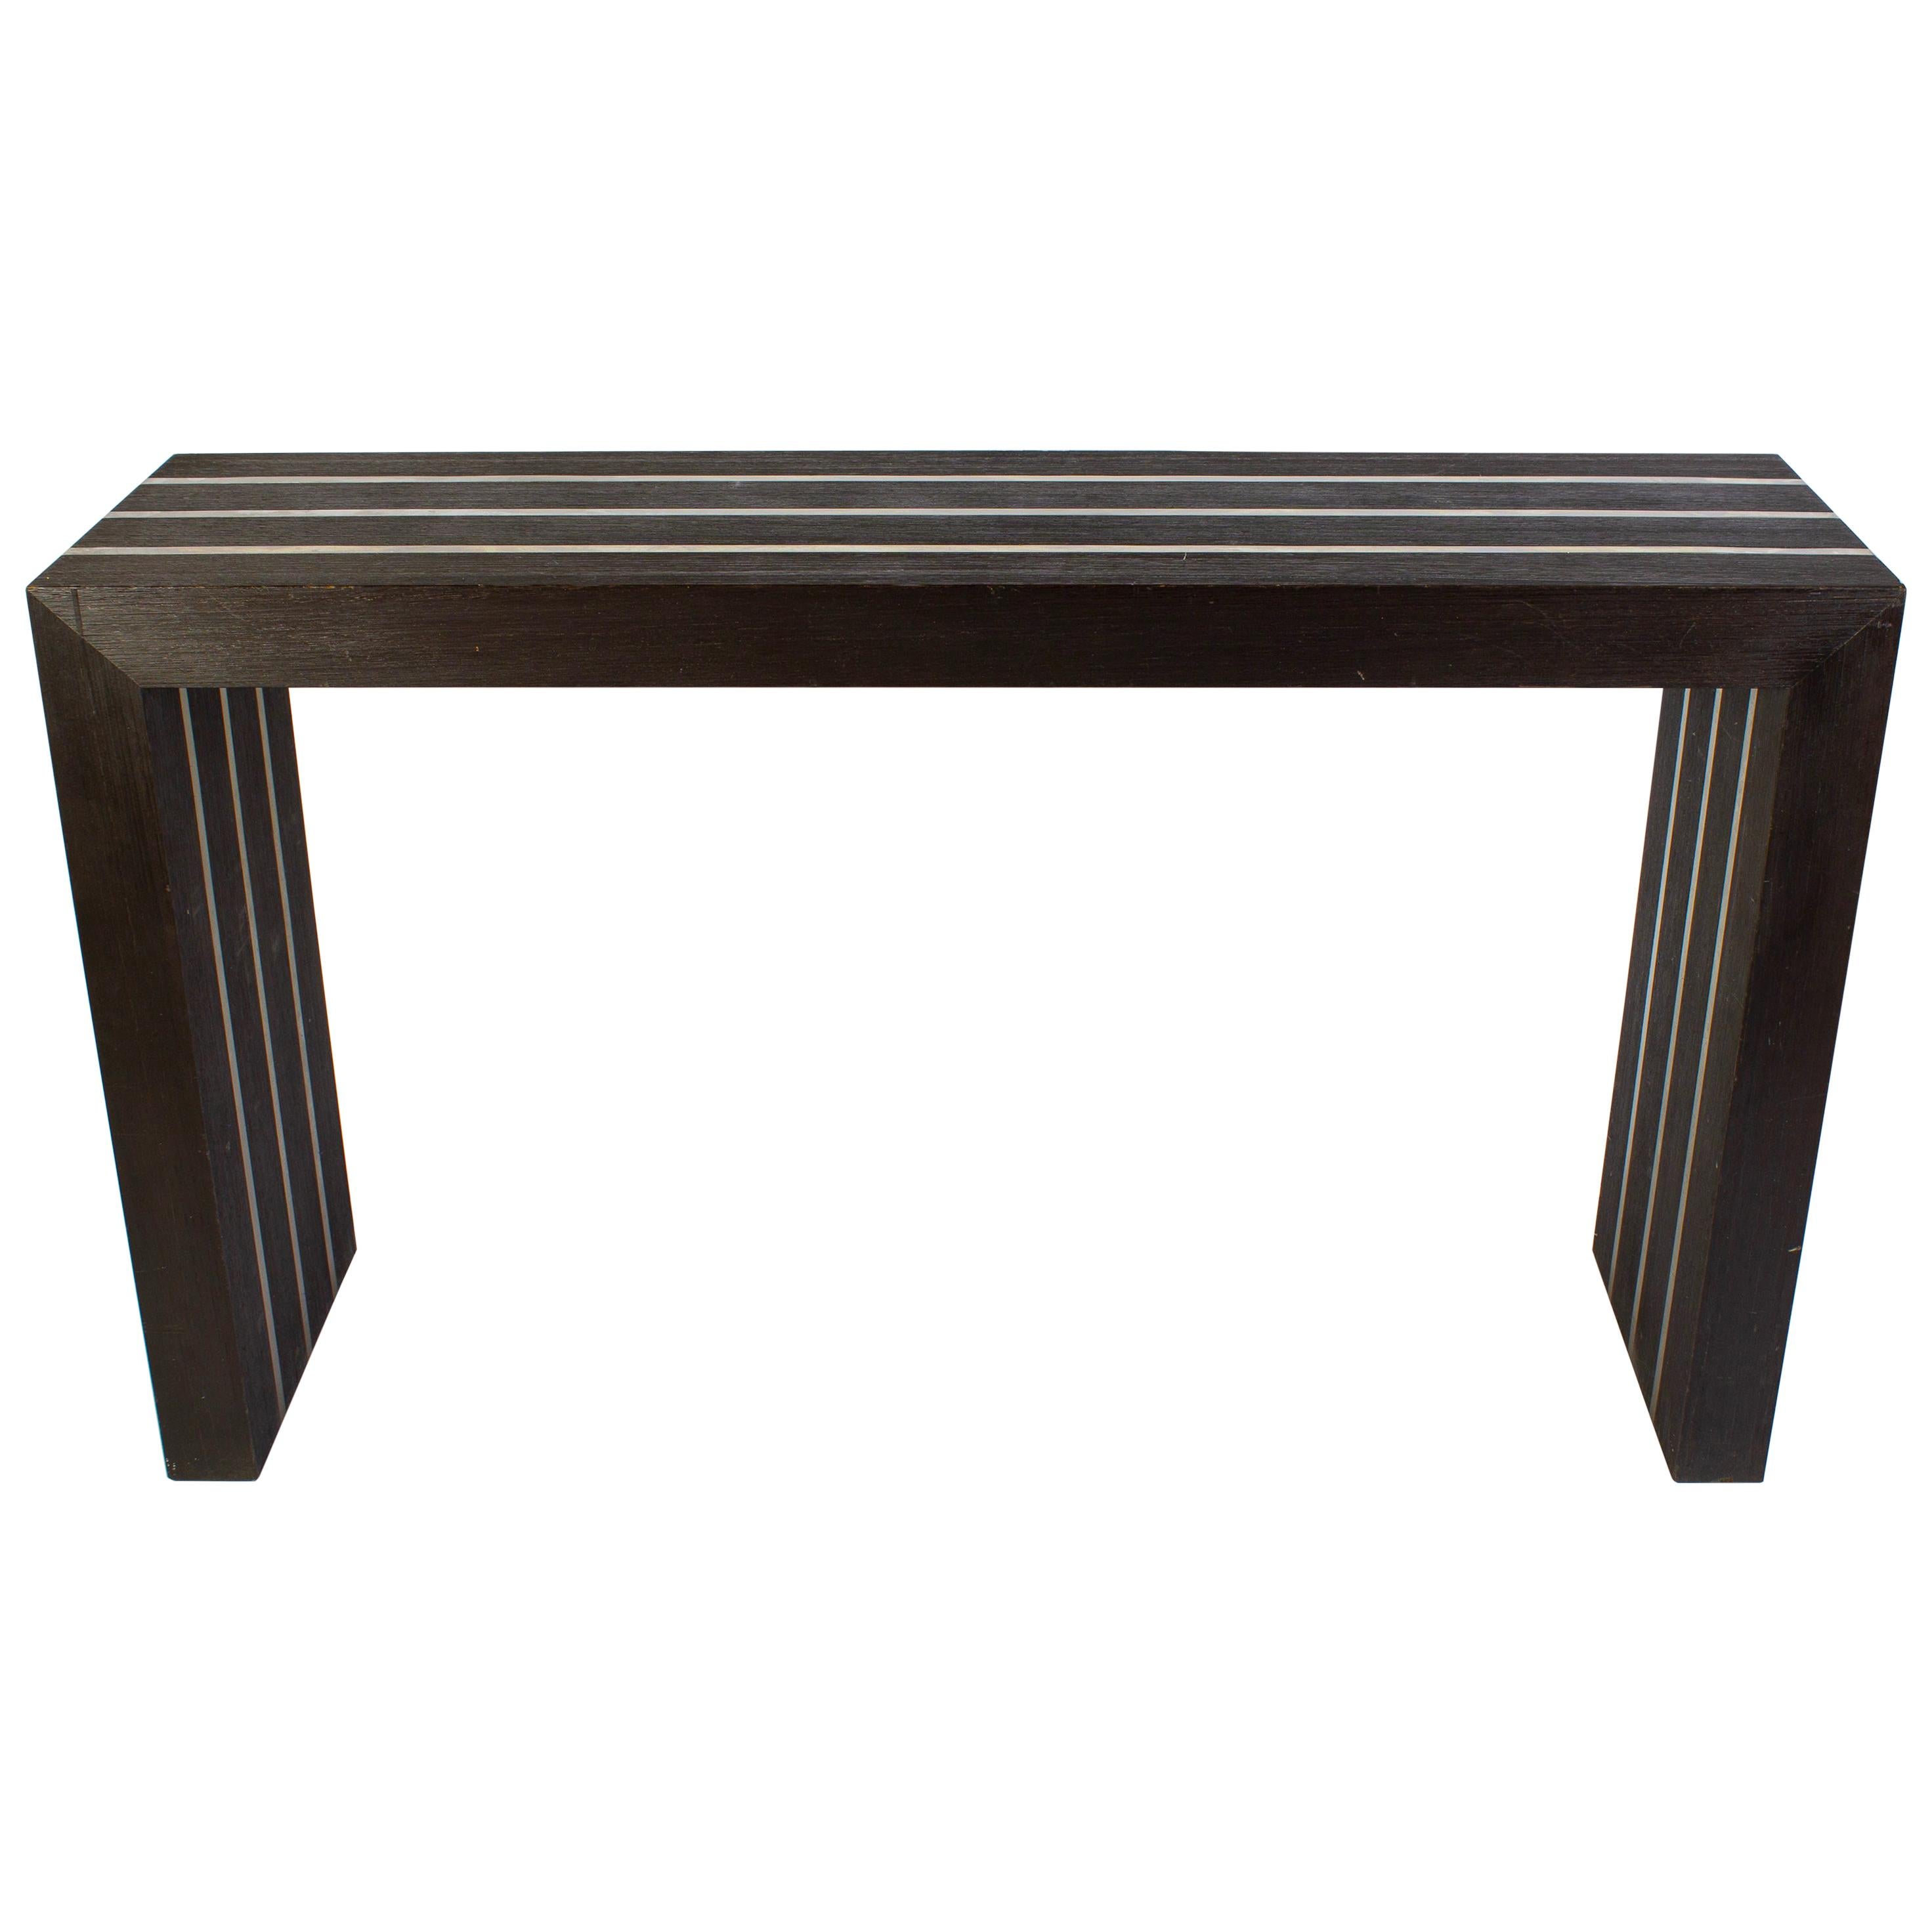 Italian Modernist Dark Wood and Steel Console Table For Sale